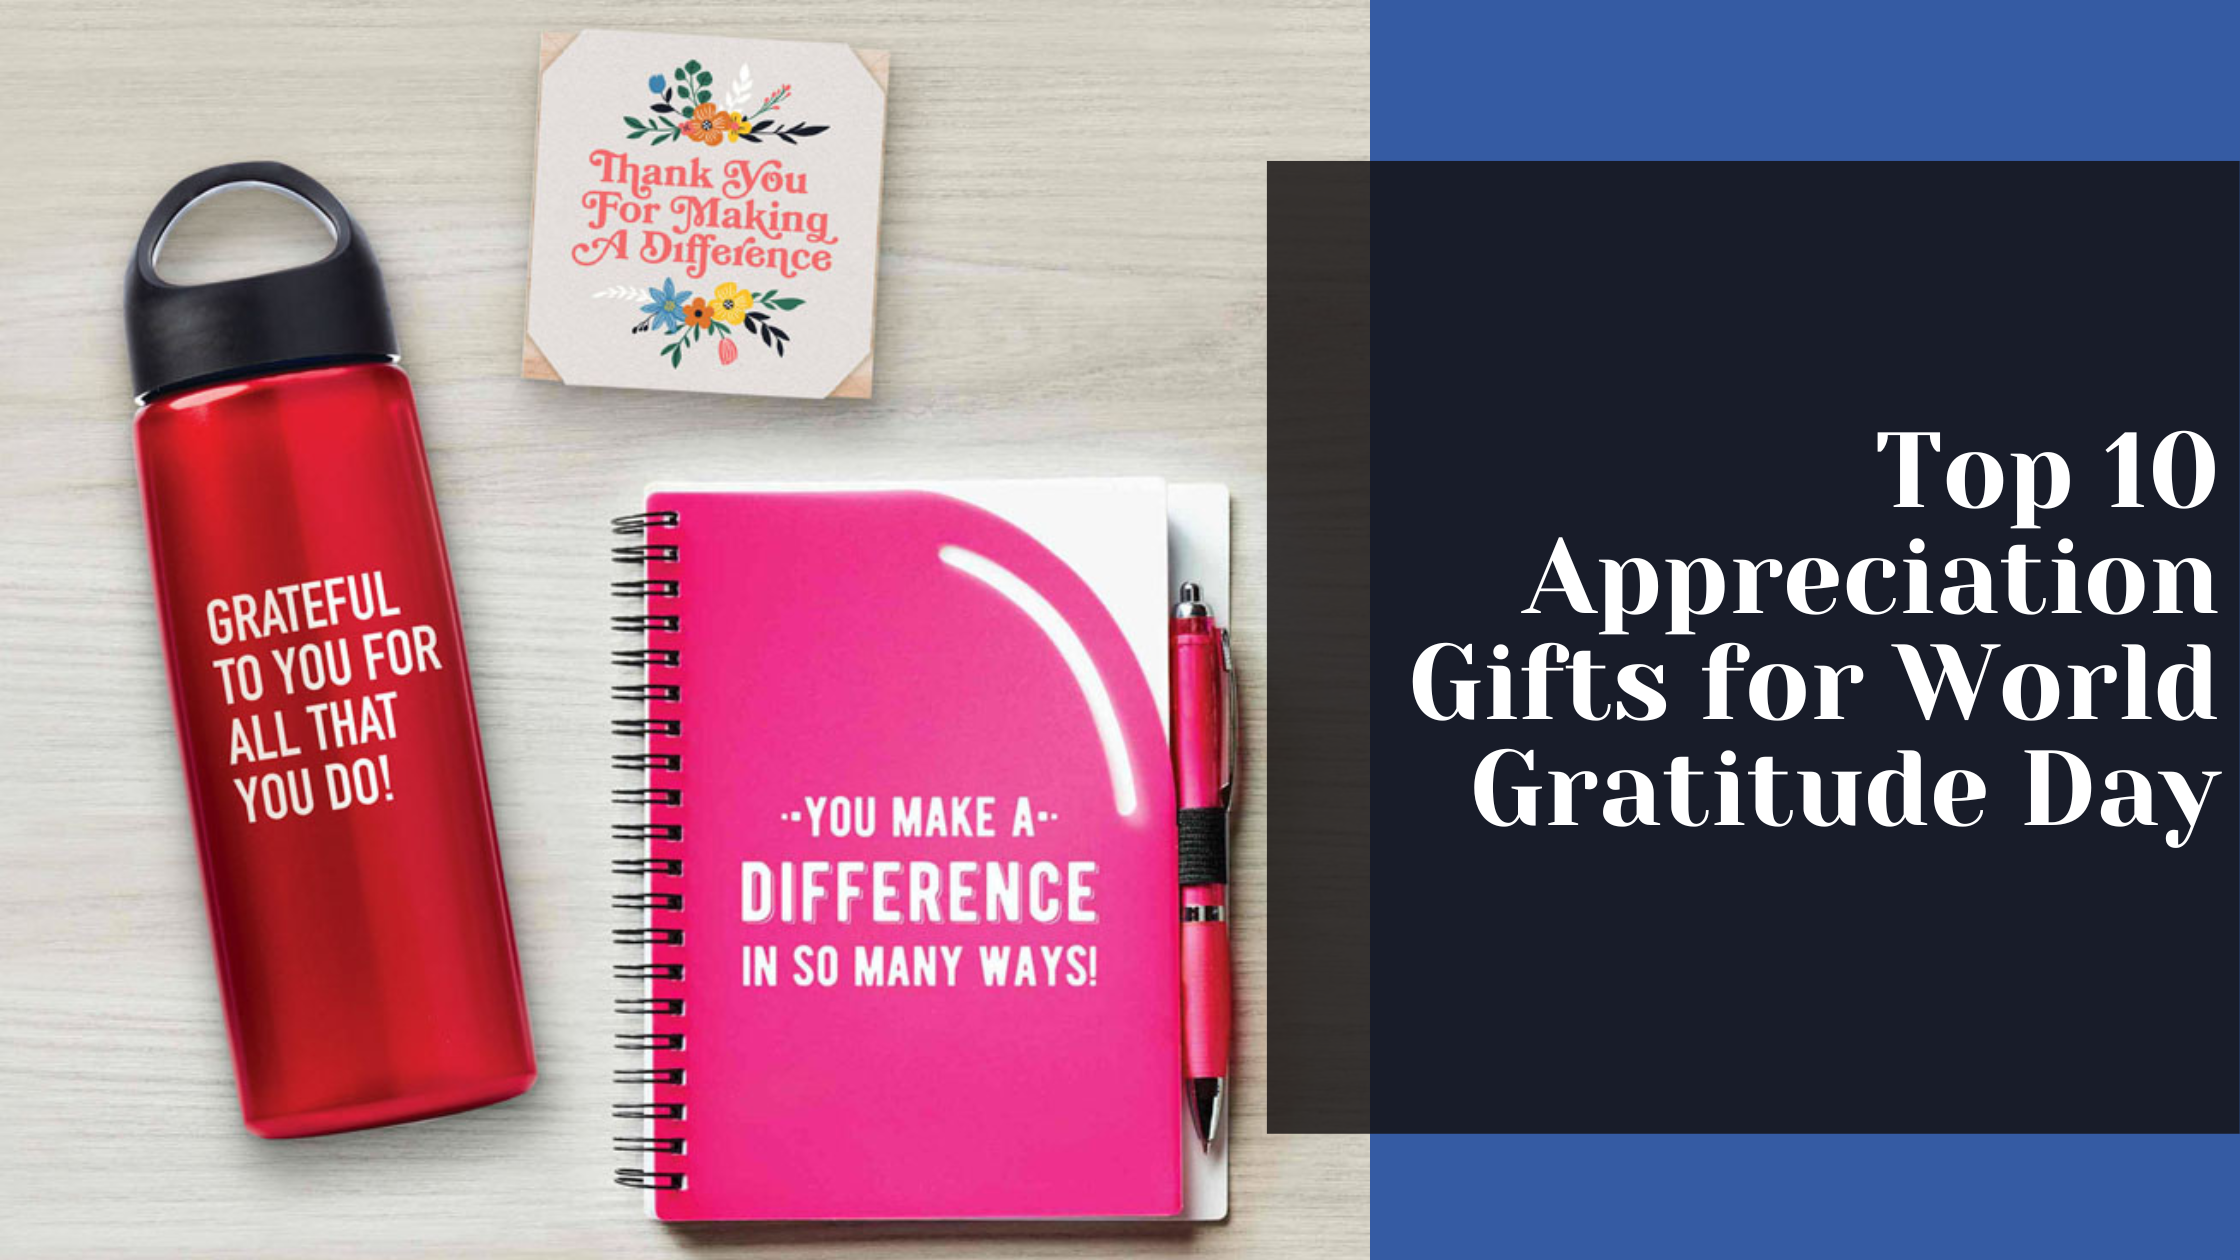 Top 10 Appreciation Gifts for World Gratitude Day